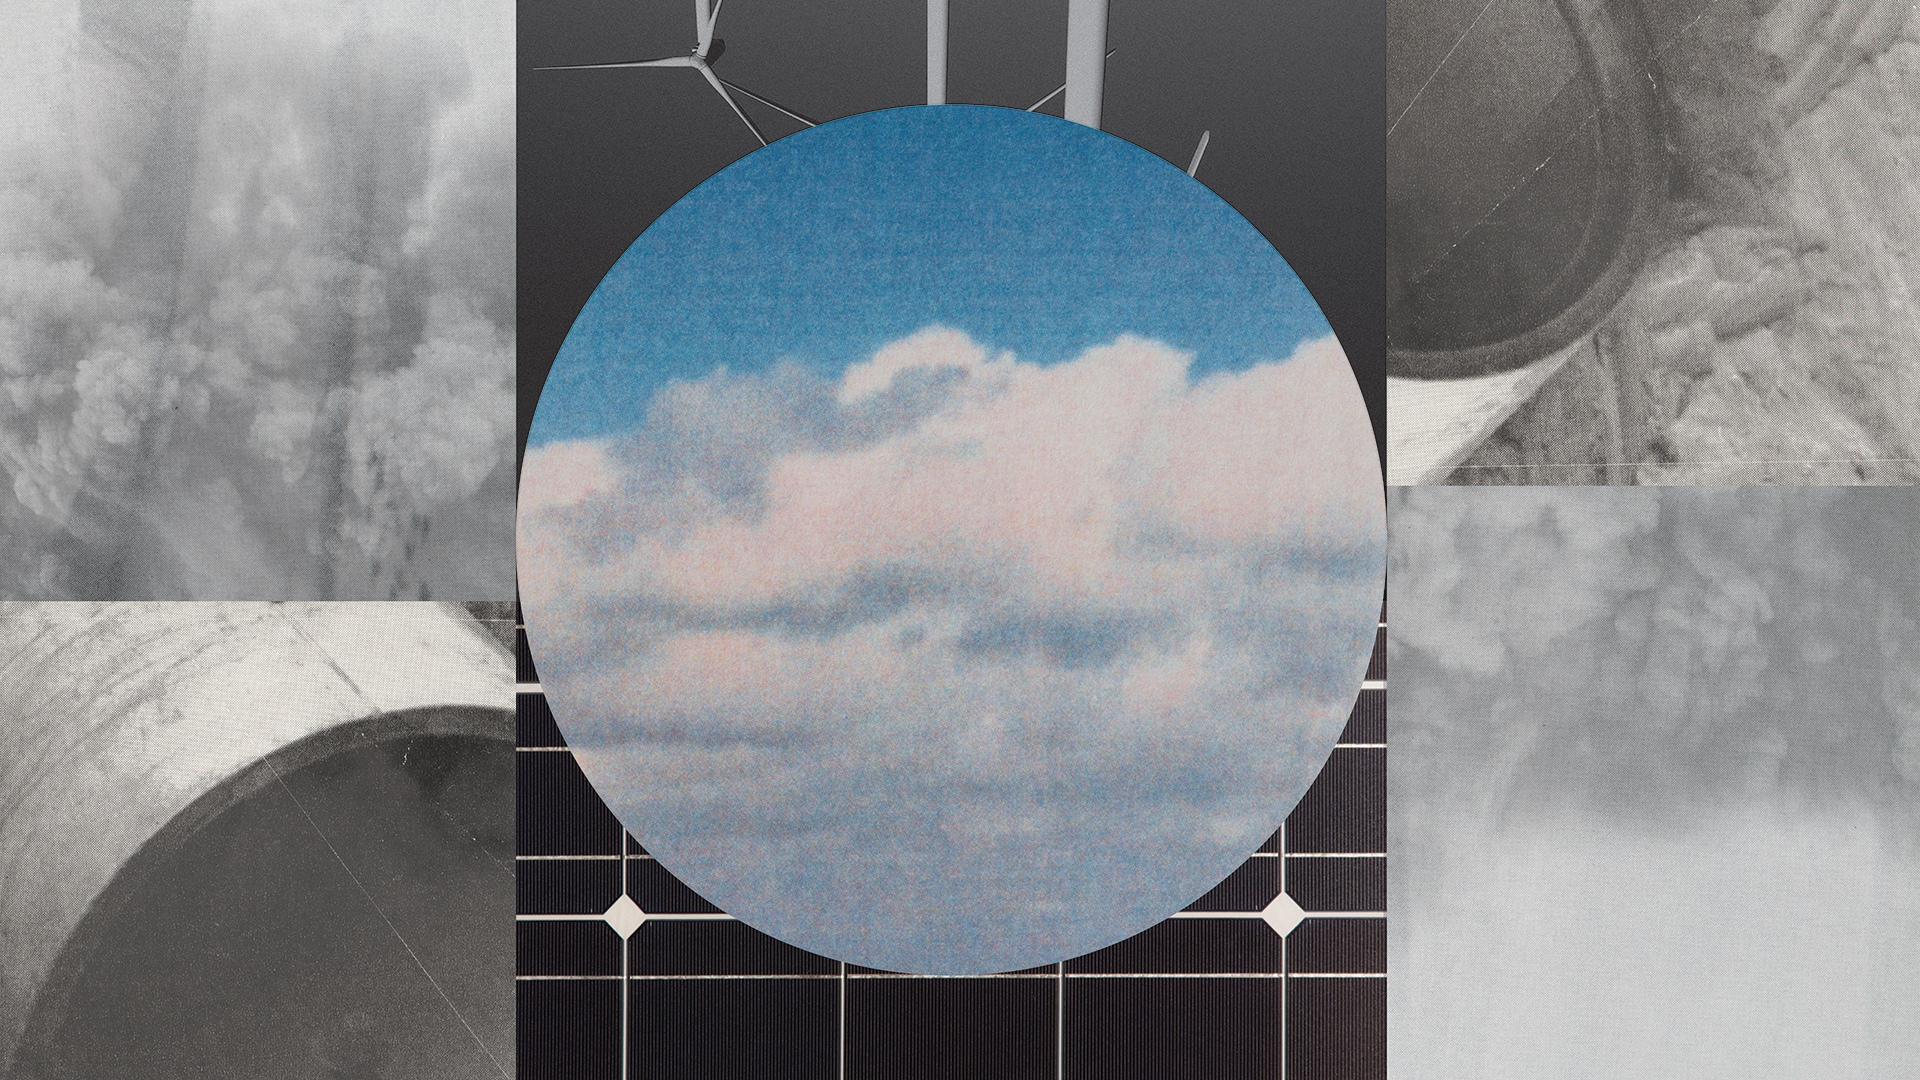 A photo collage includes images of clouds on a blue sky, solar panels, wind turbines, pipelines, and puffs of smoke.